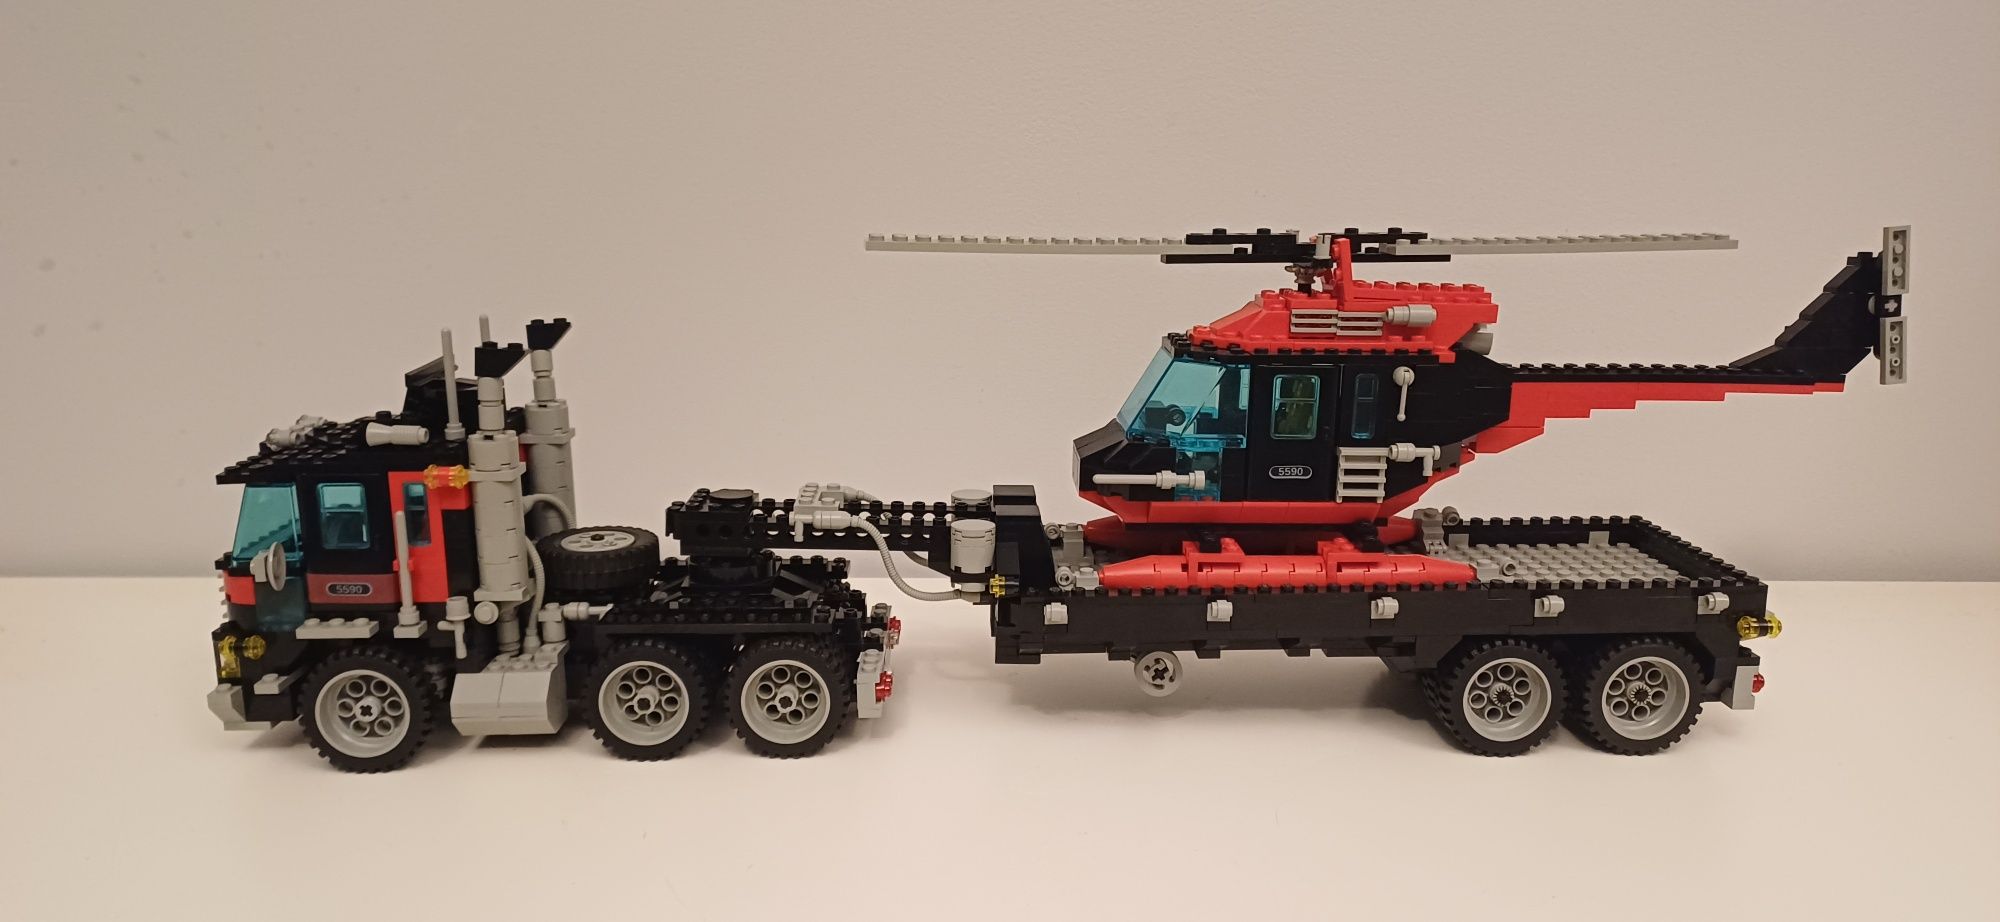 Lego Model Team 5590 - Whirl and Wheel Super Truck